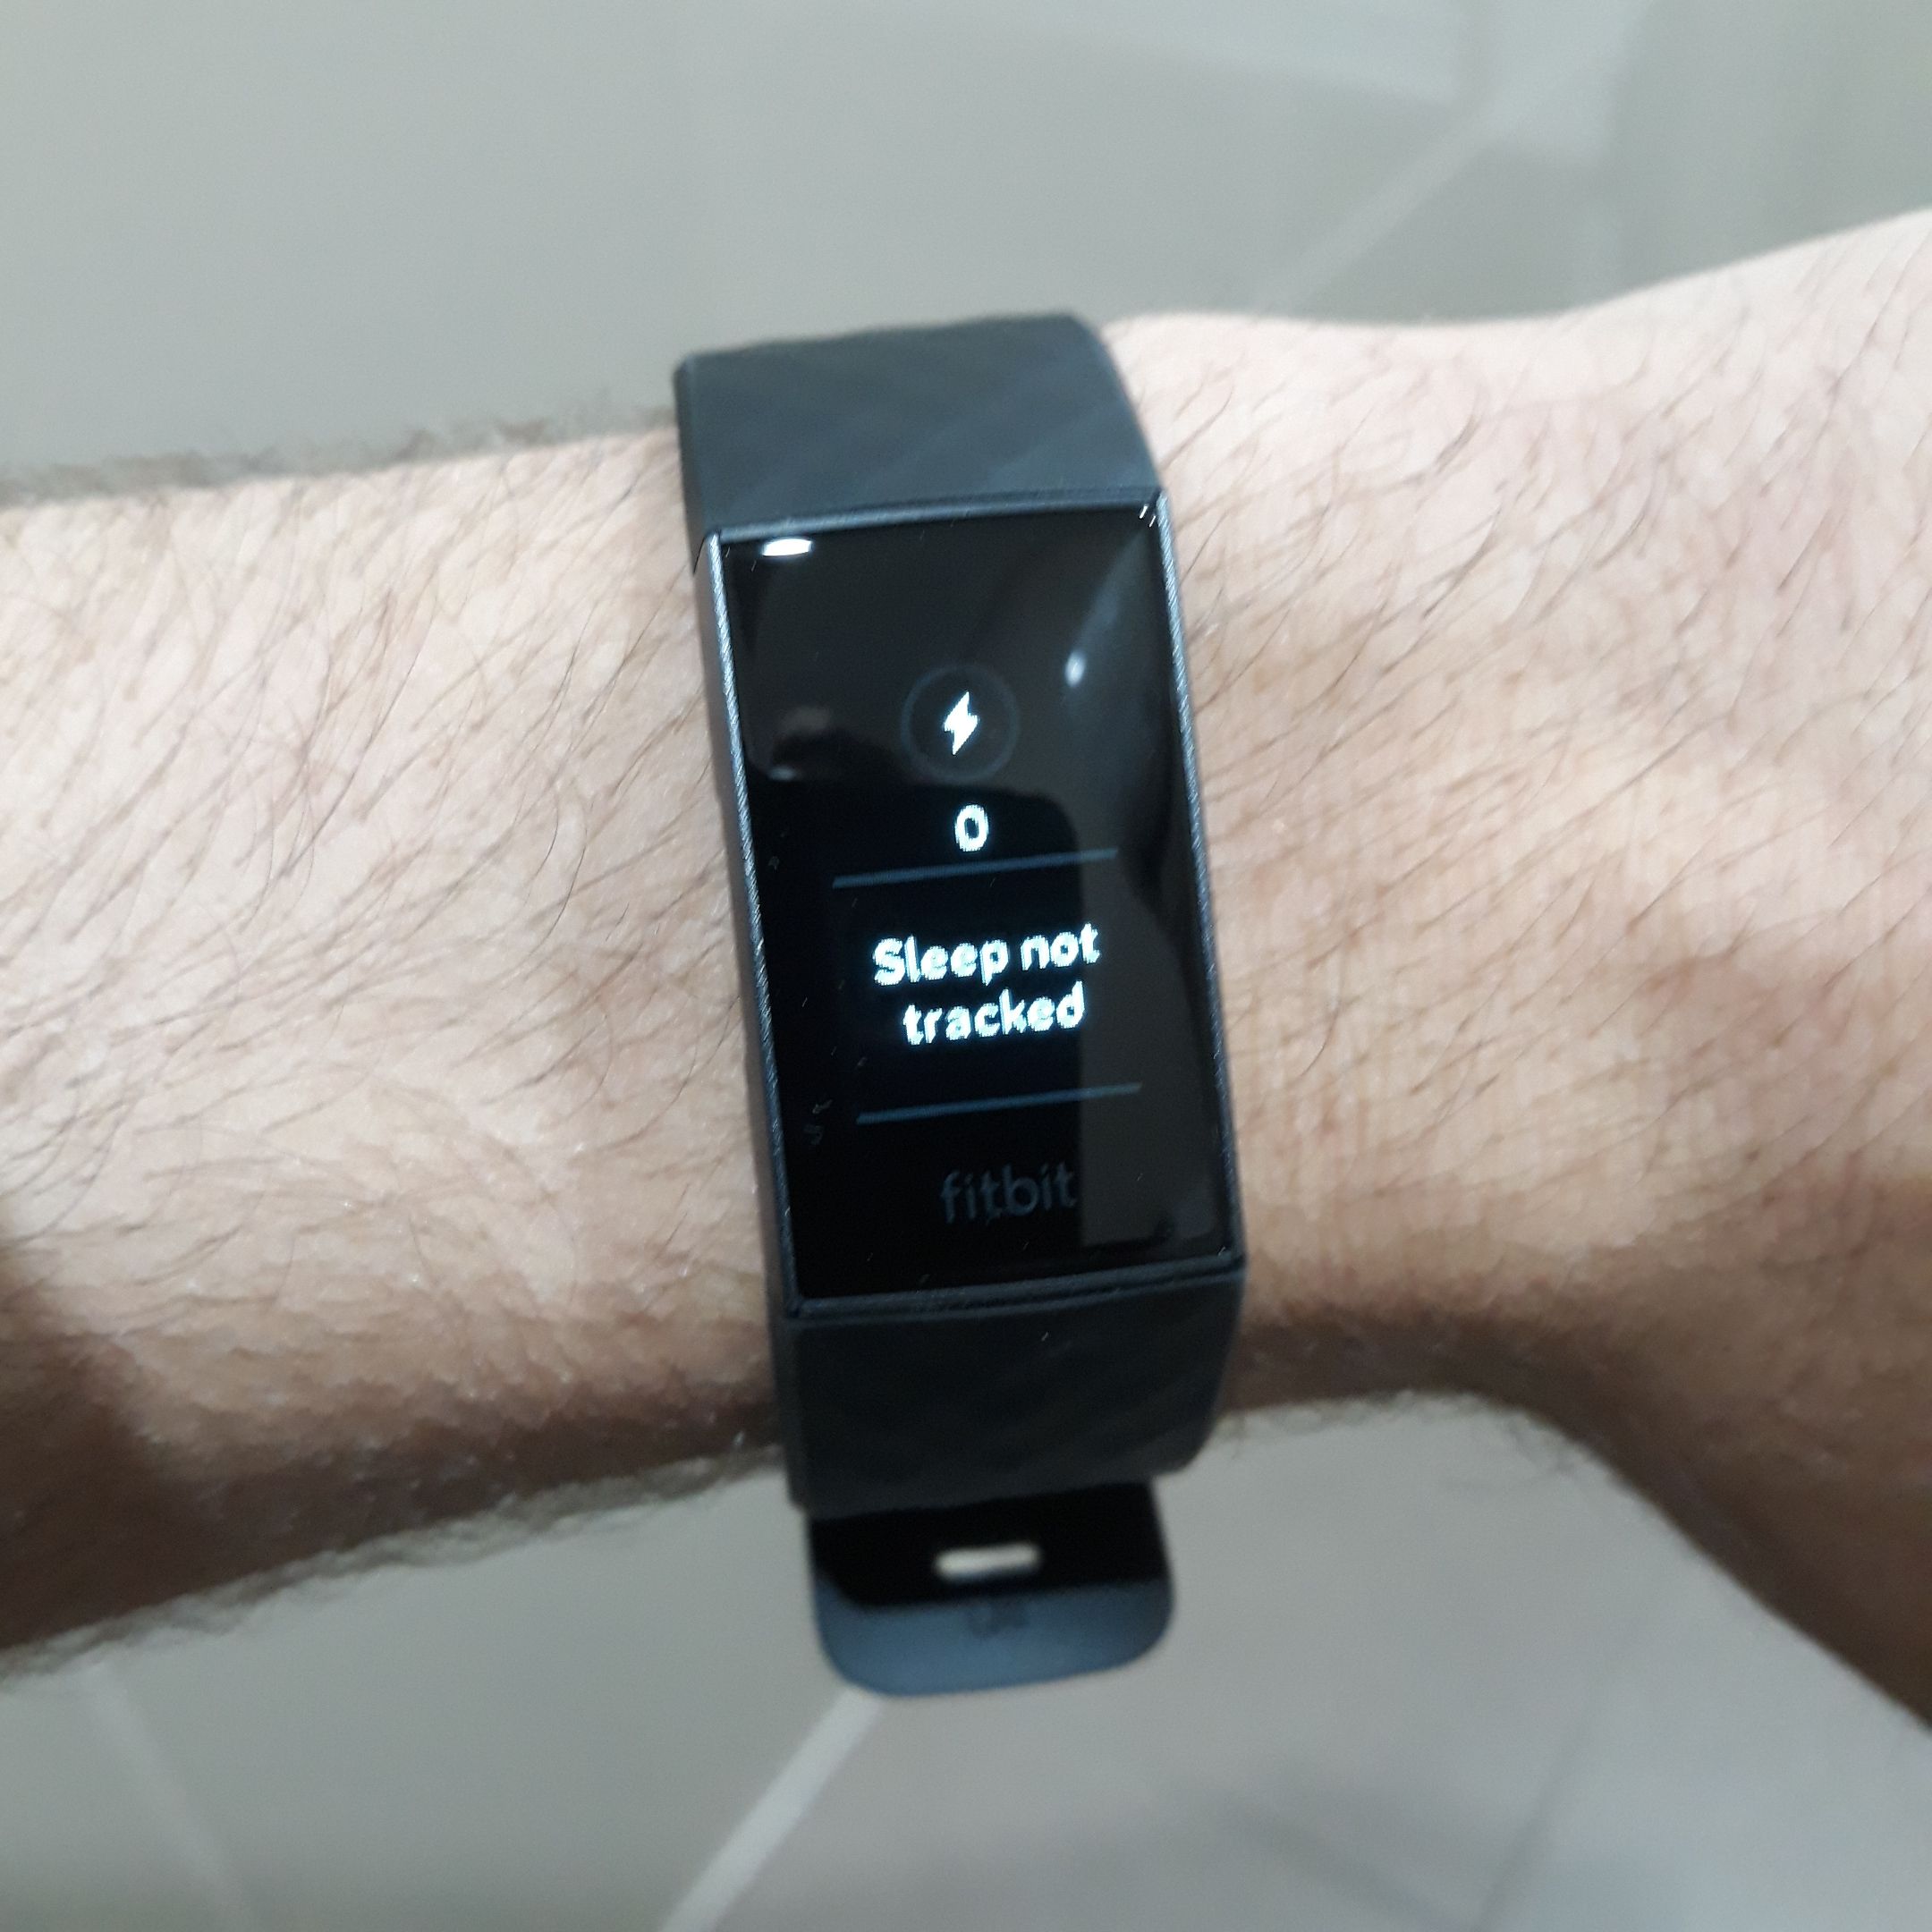 sleep tracking fitbit charge 3